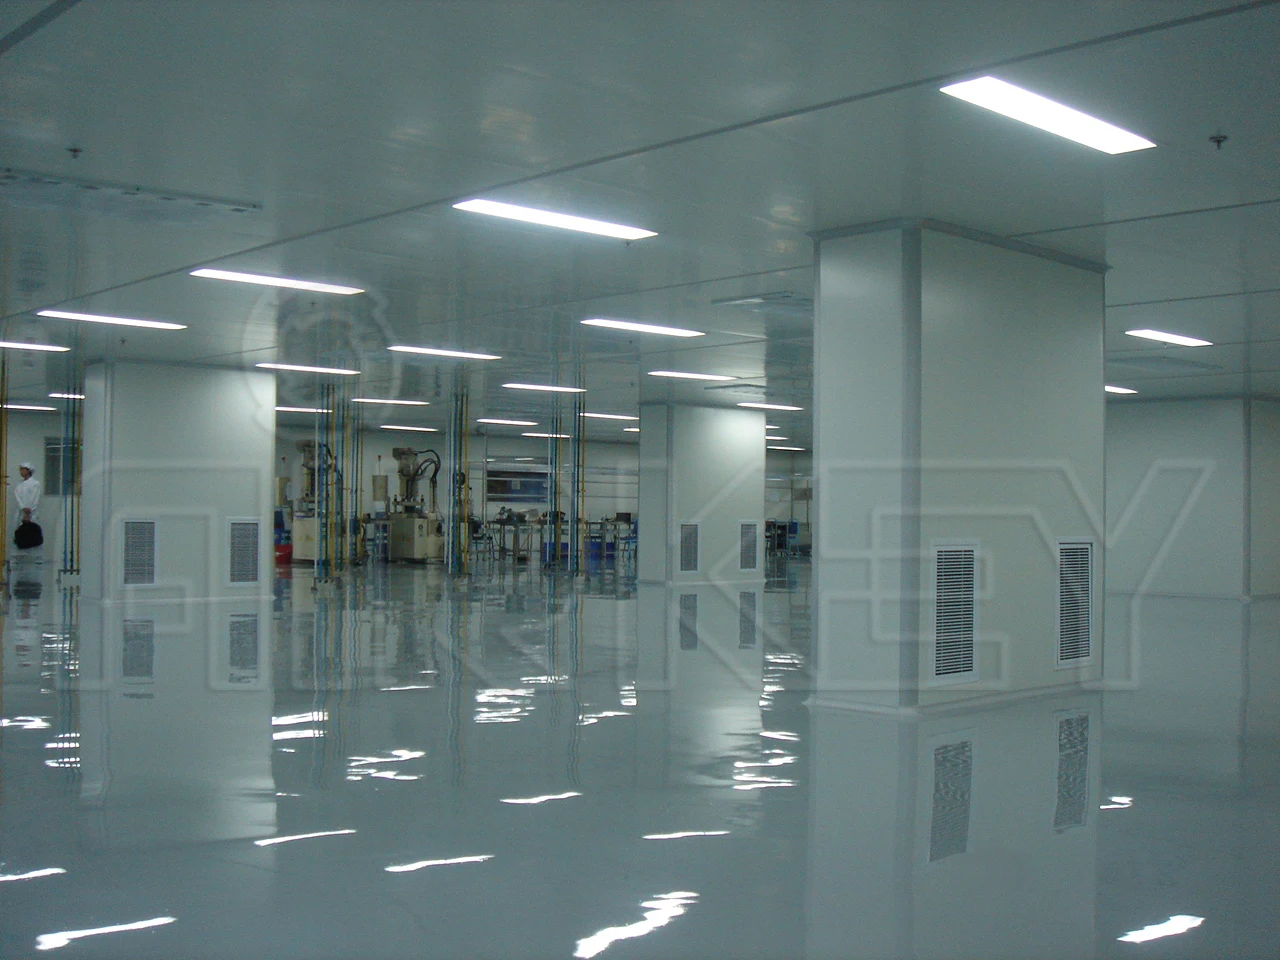 Airkey Hot sale Hign Quality Anti-static PVC Floor  for hospital/laboratory/factory/manufacture